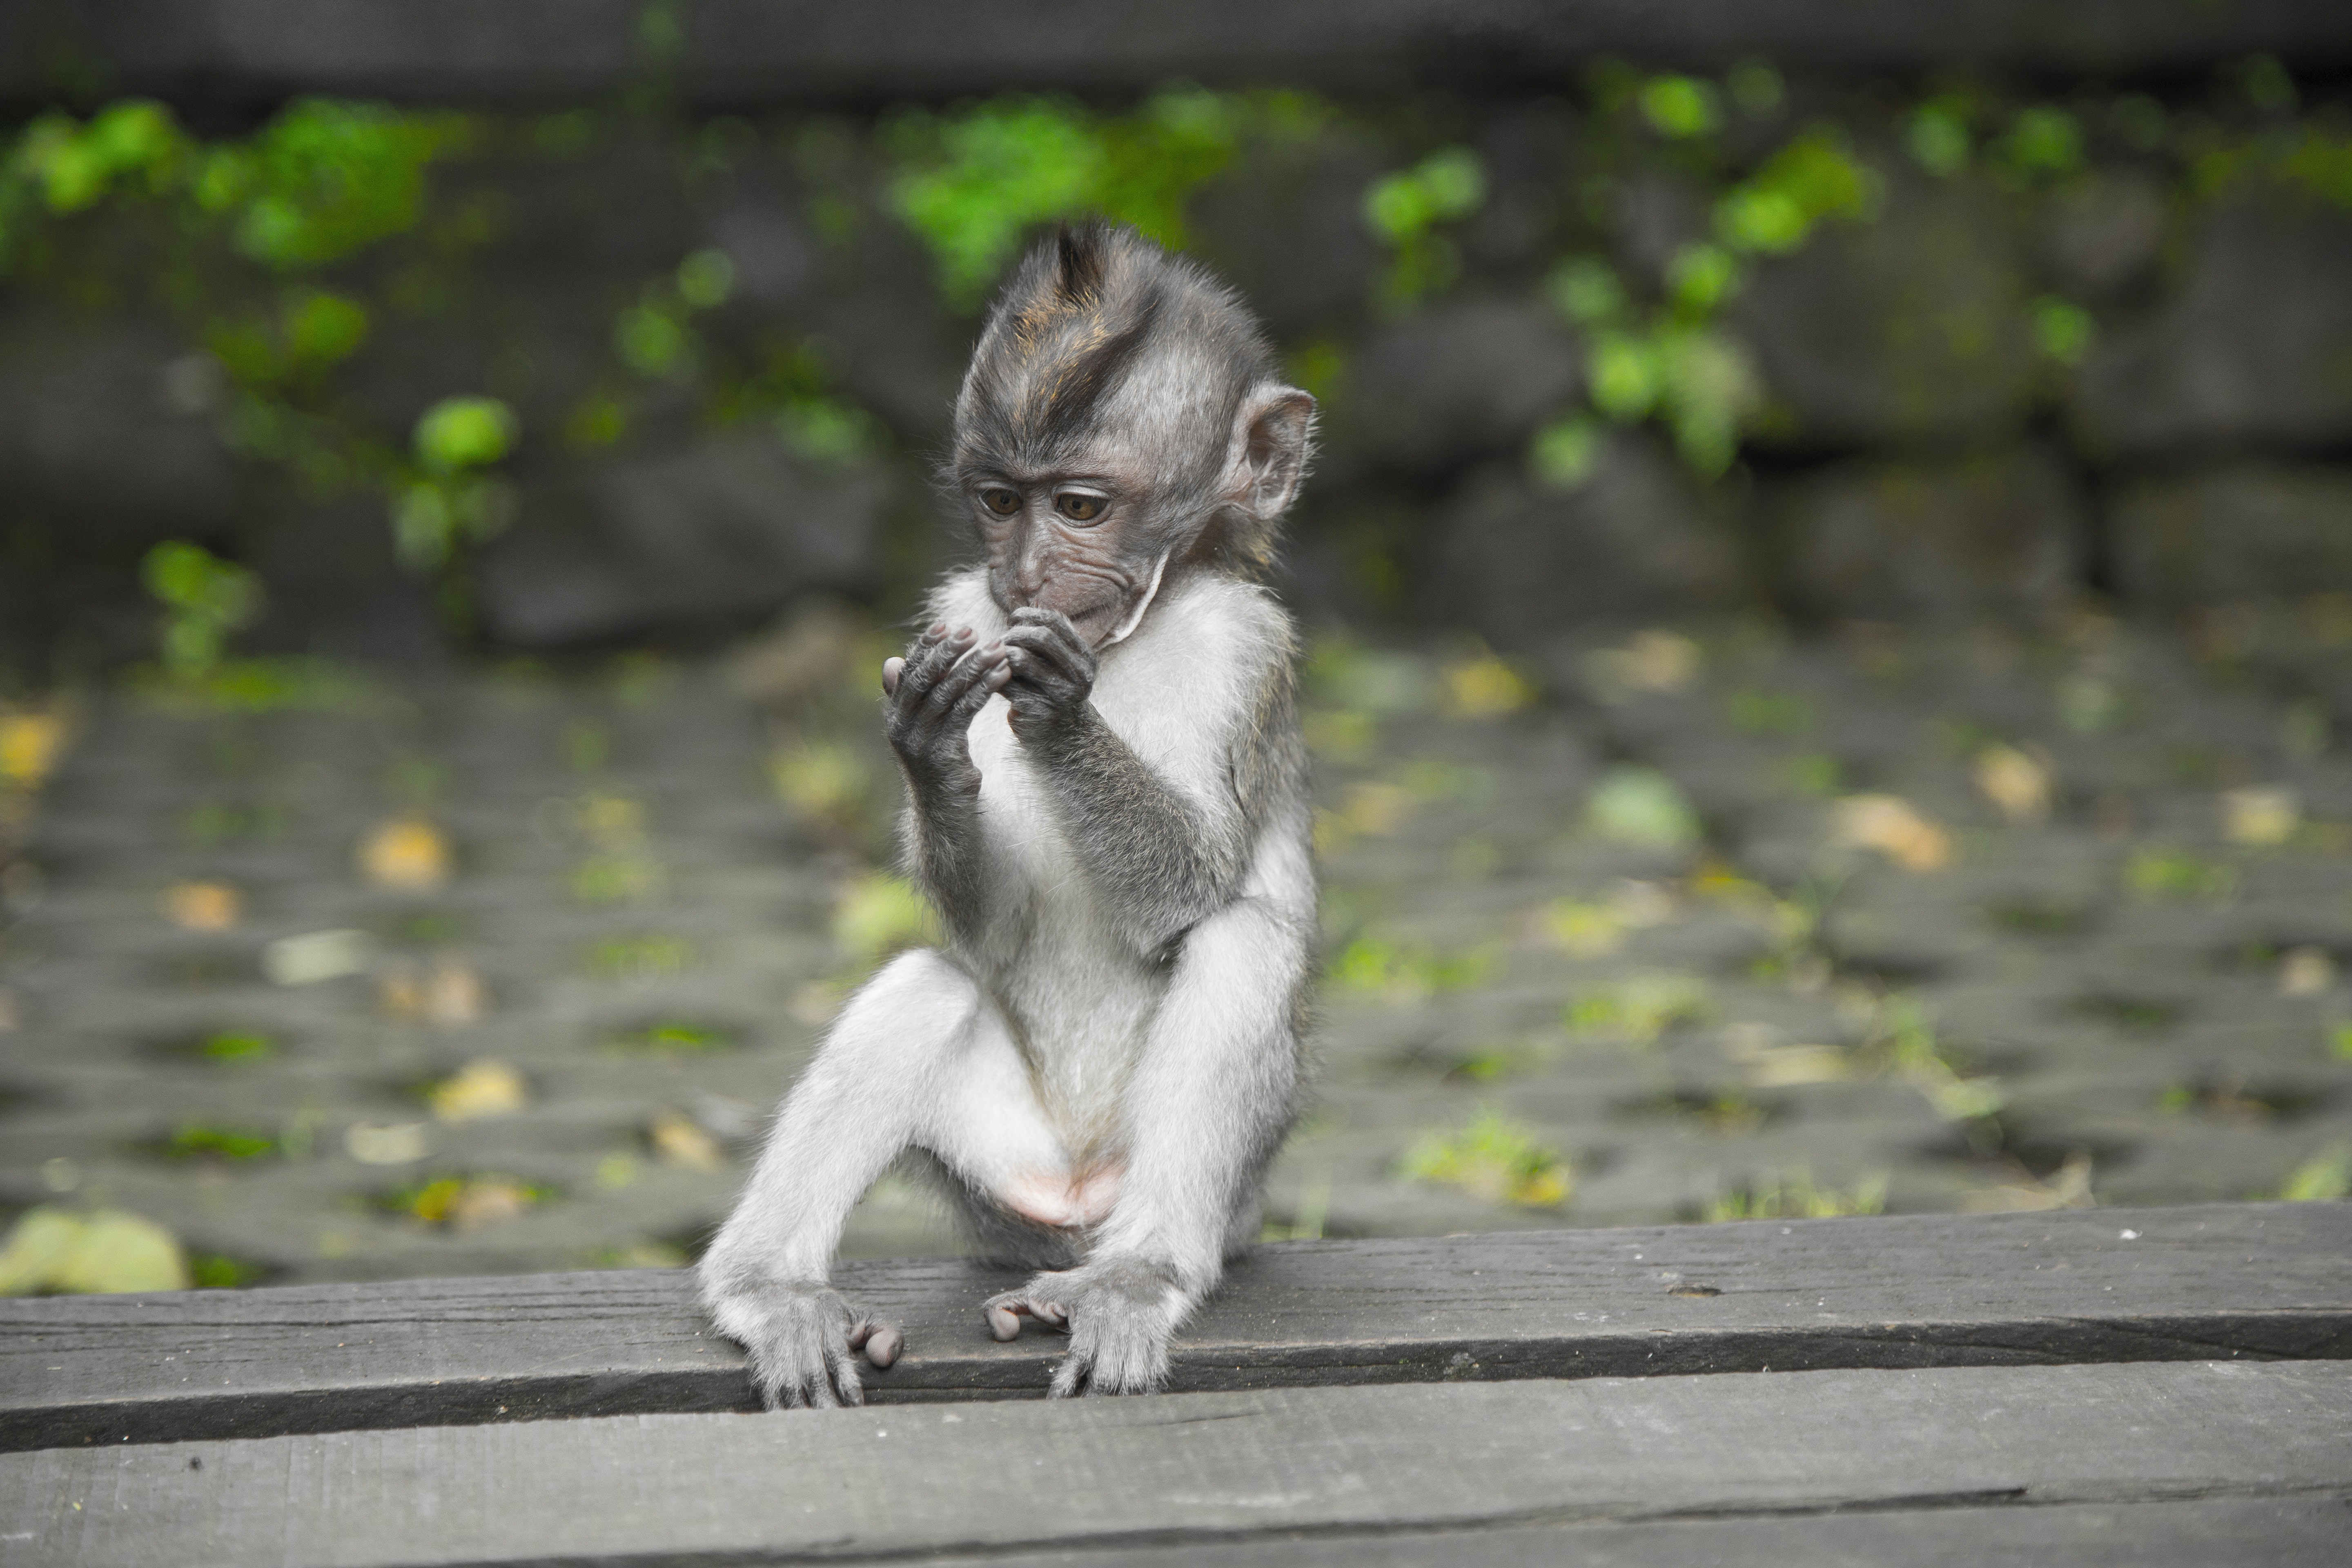 Primate Sitting On Wooden Surface, Adorable, Animal, Animal photography, Bali, HQ Photo